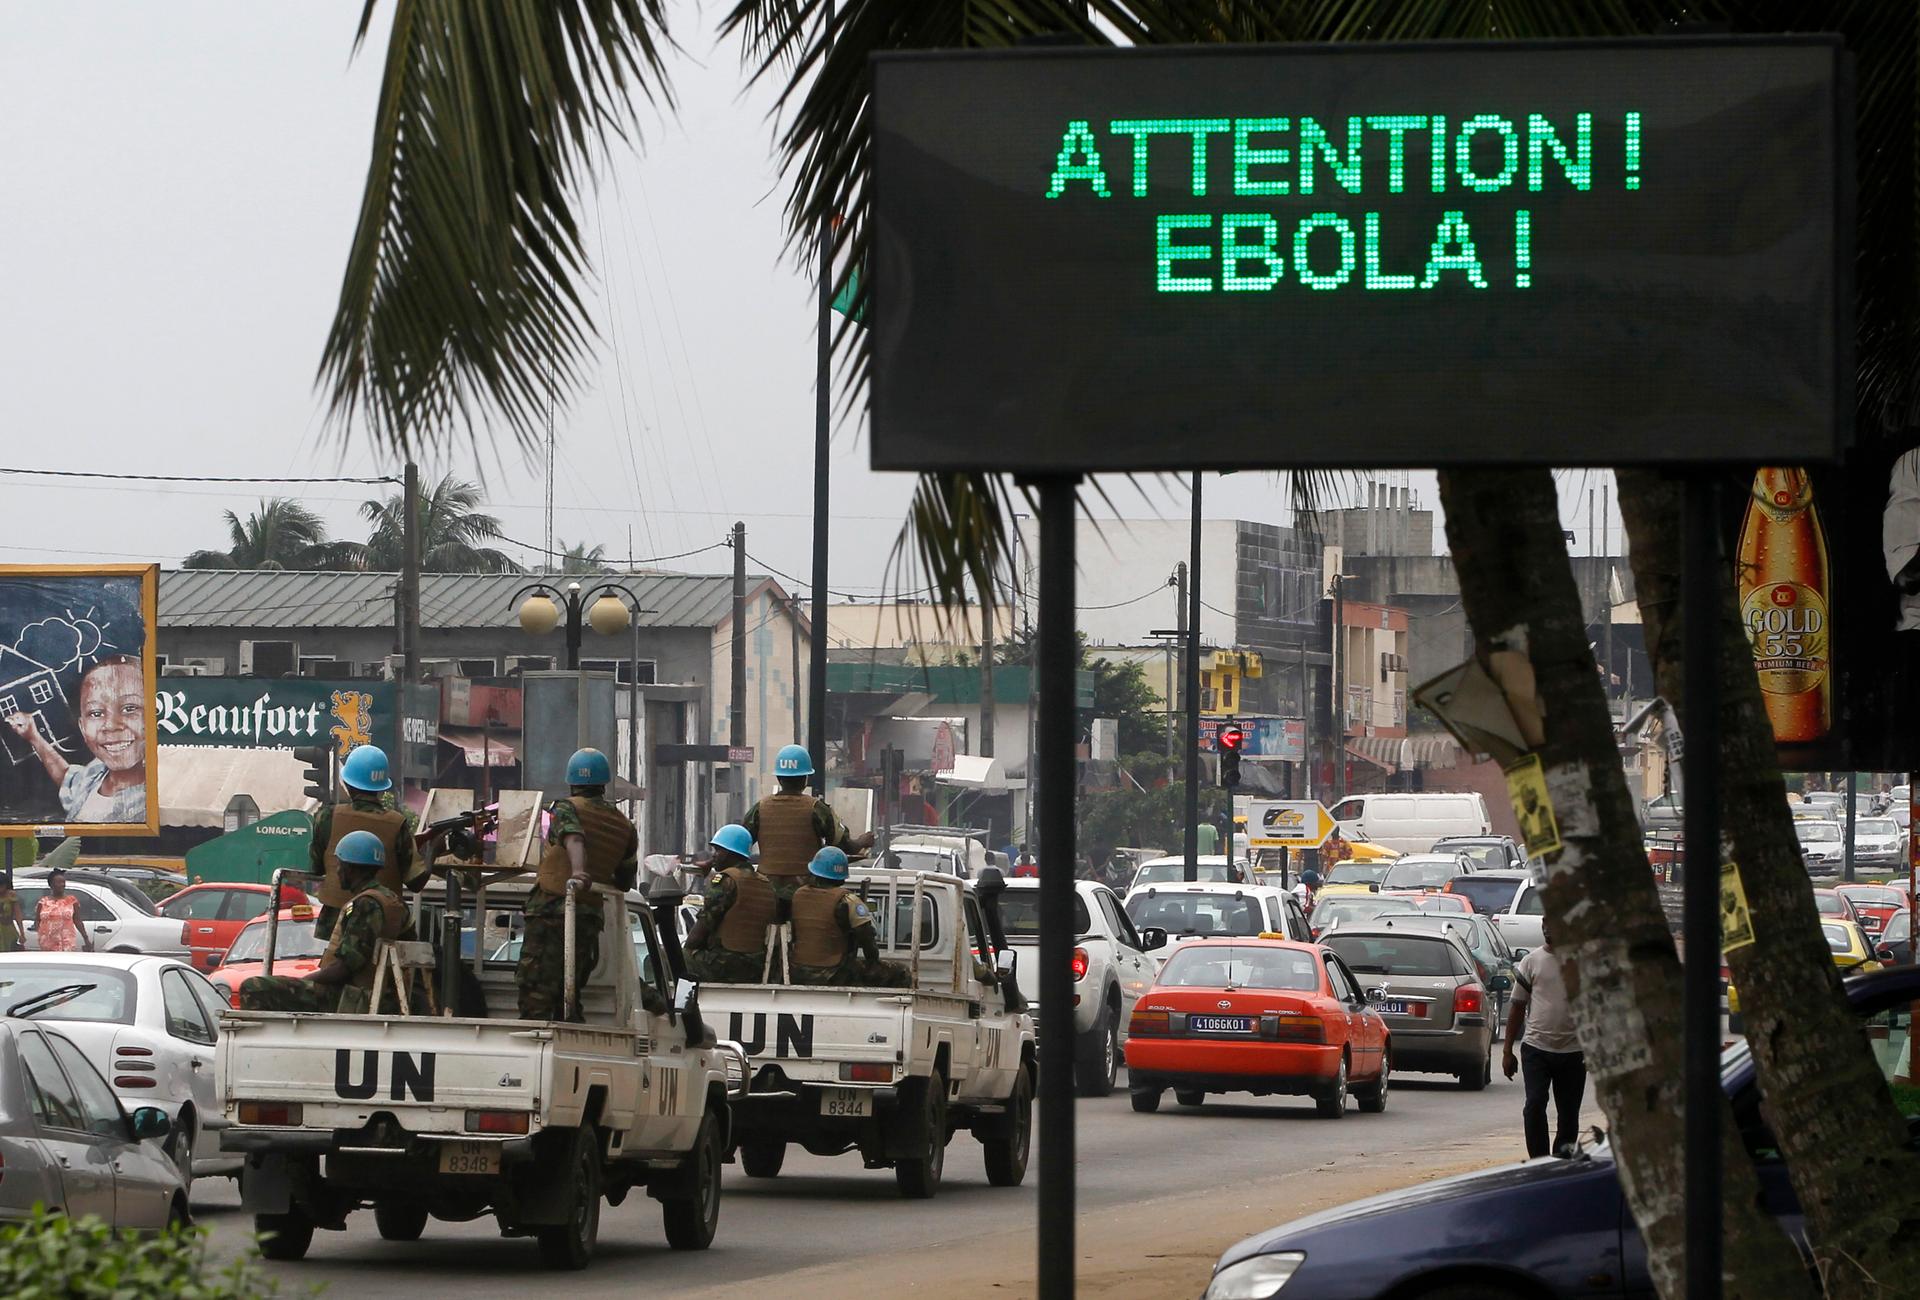 A UN convoy of soldiers passes a screen displaying a message about Ebola on a street in Abidjan, Ivory Coast, on August 14, 2014. 